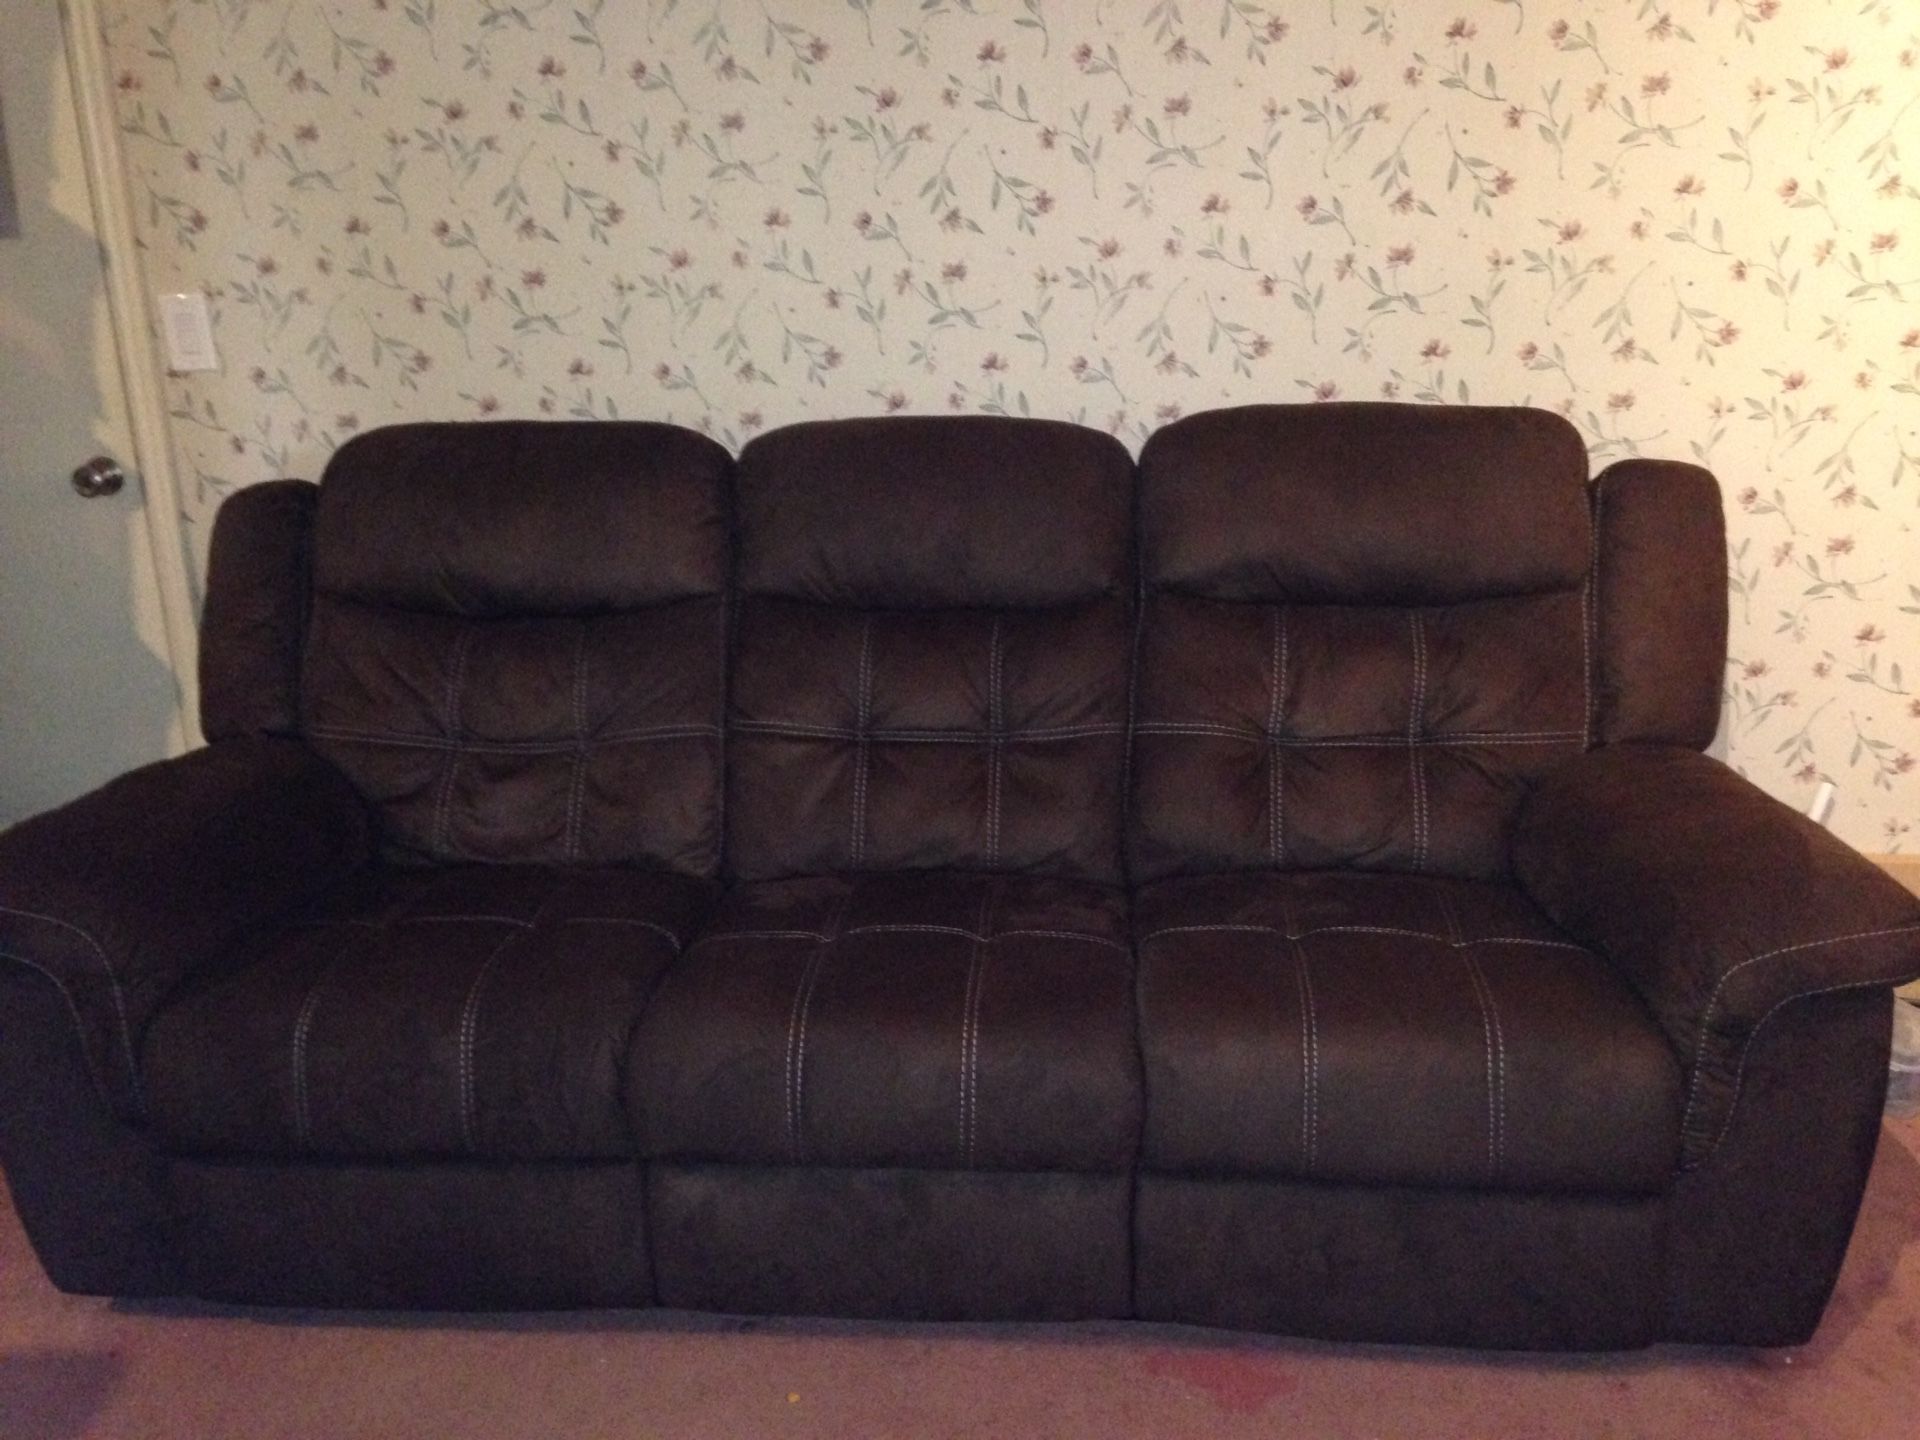 Brand new microfiber couch